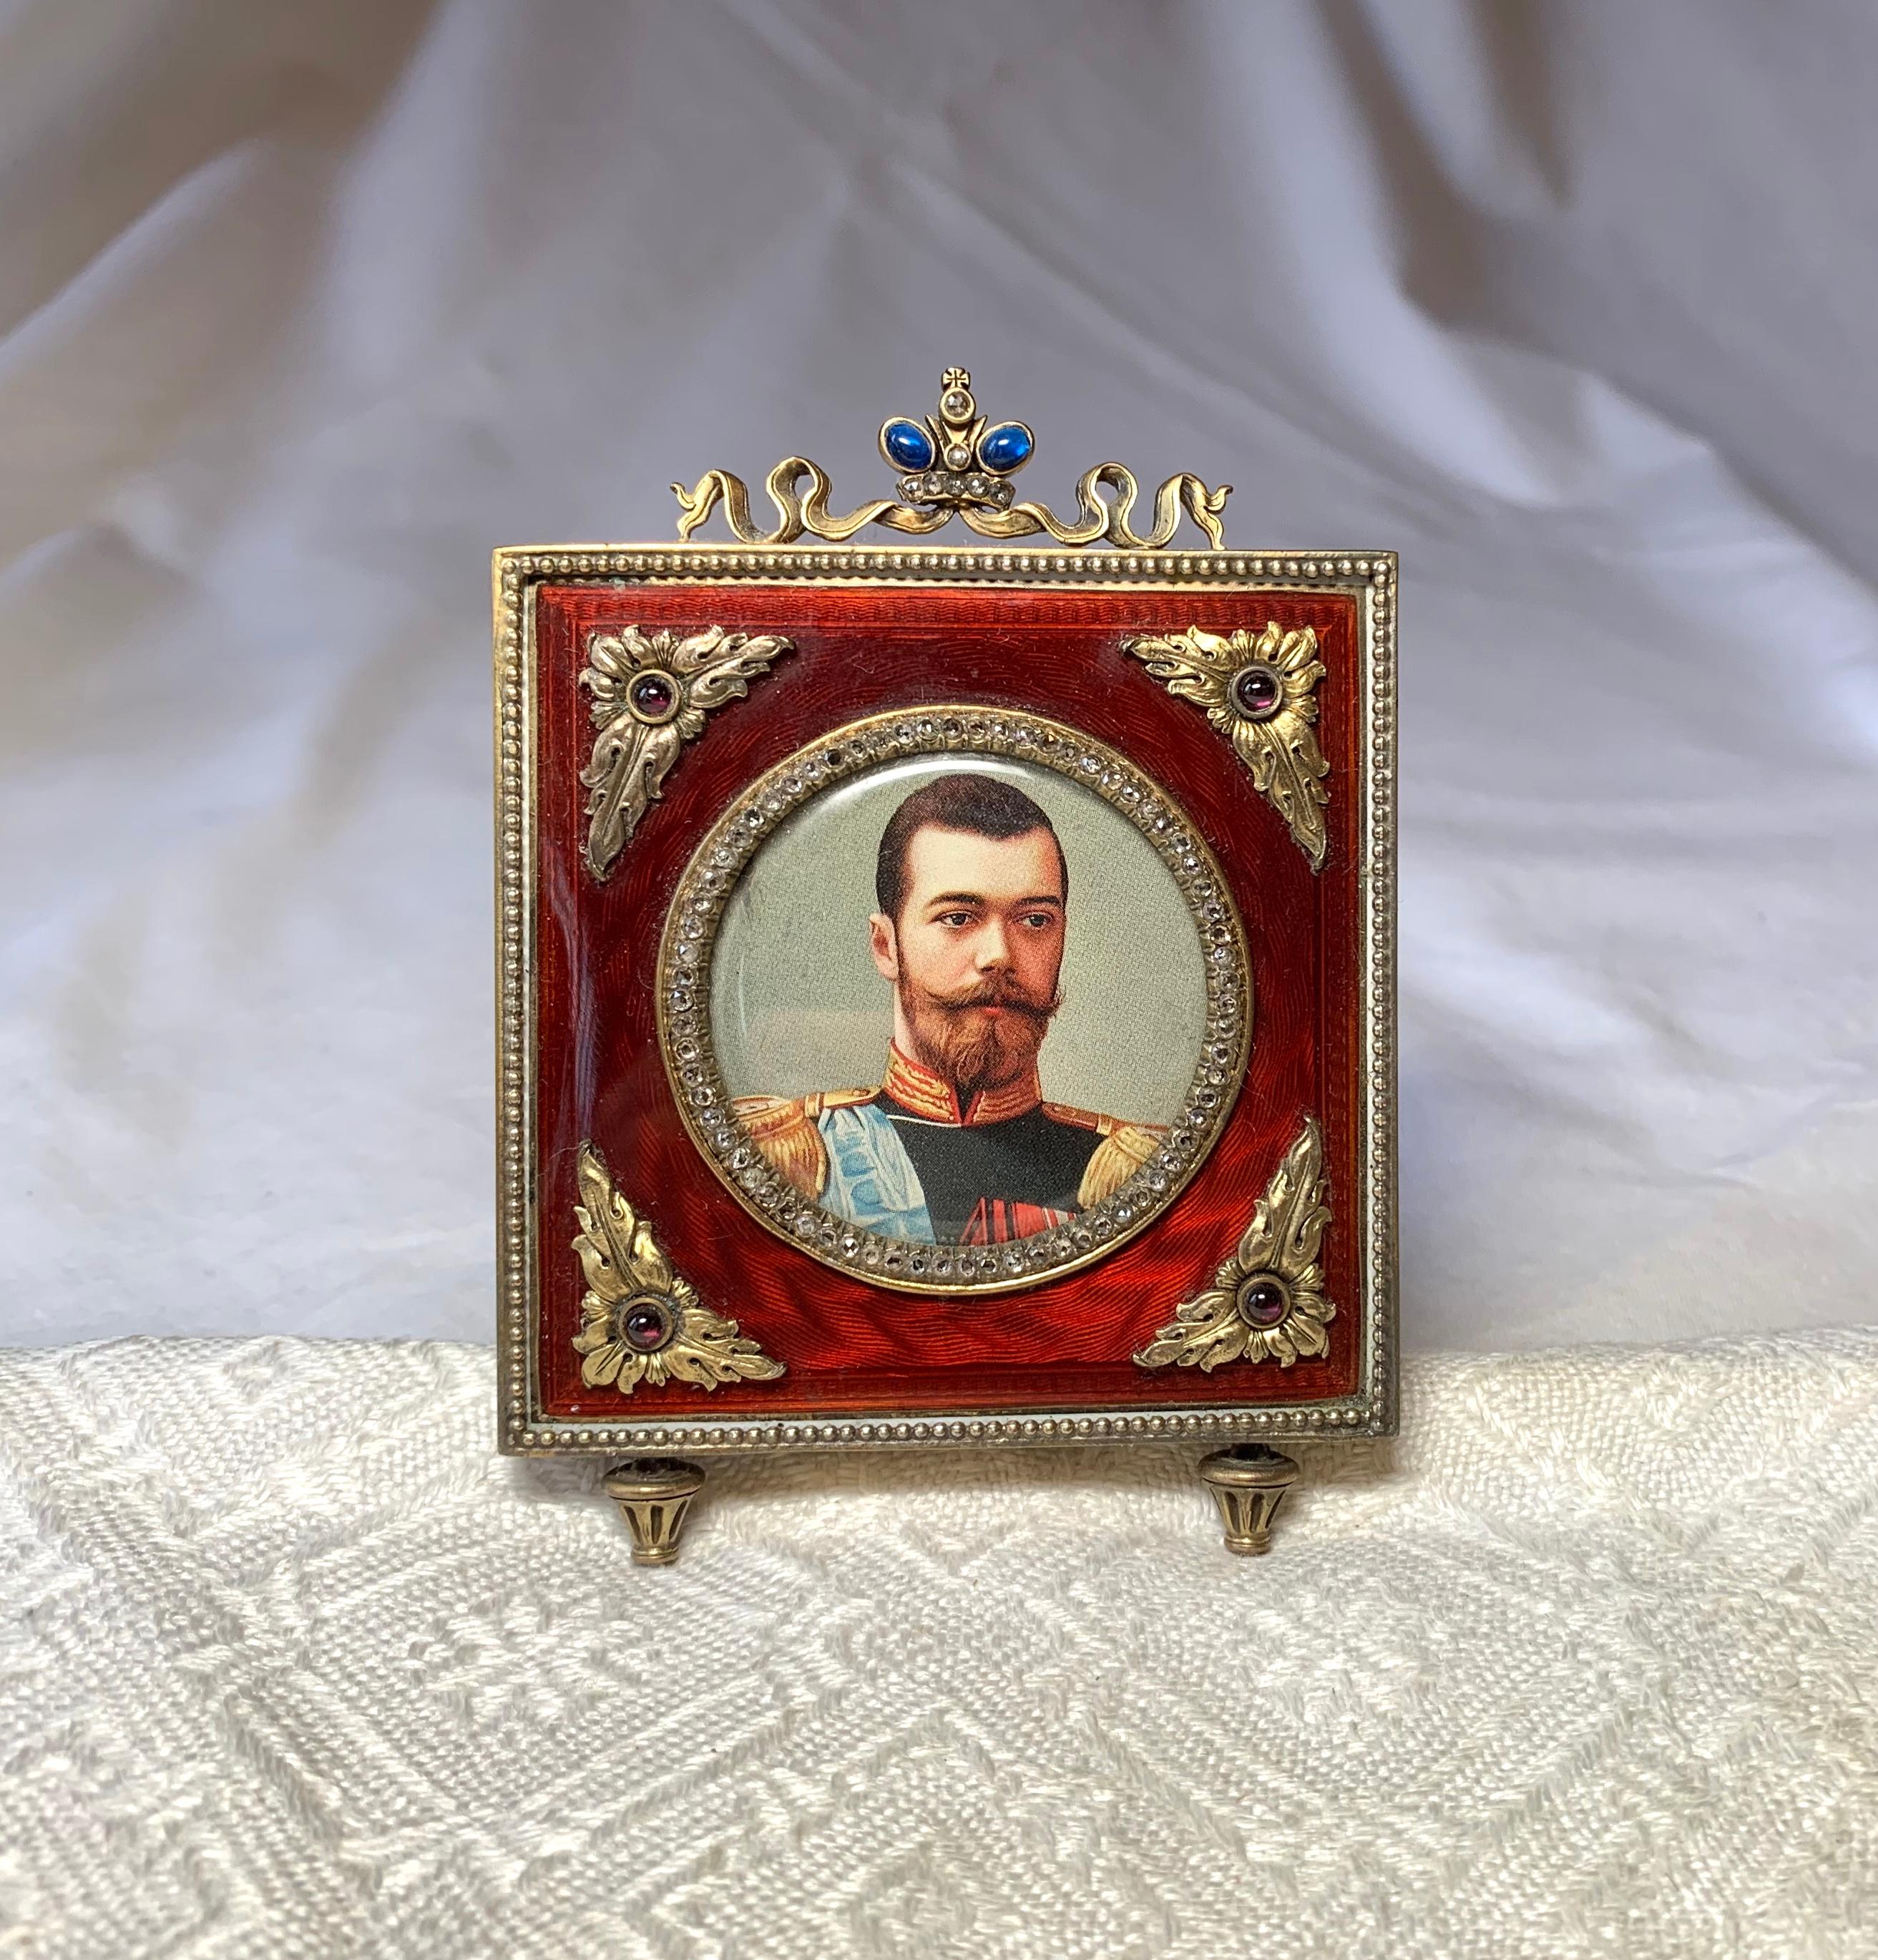 A stunning antique Russian Picture Frame decorated with Rose Cut Diamonds, Sapphires, Rubies and vivid red Guilloche Enamel.  The silver gilt frame is in the Faberge Style.  The small frame is a masterpiece of Russian Silver and Jewelry making.  It